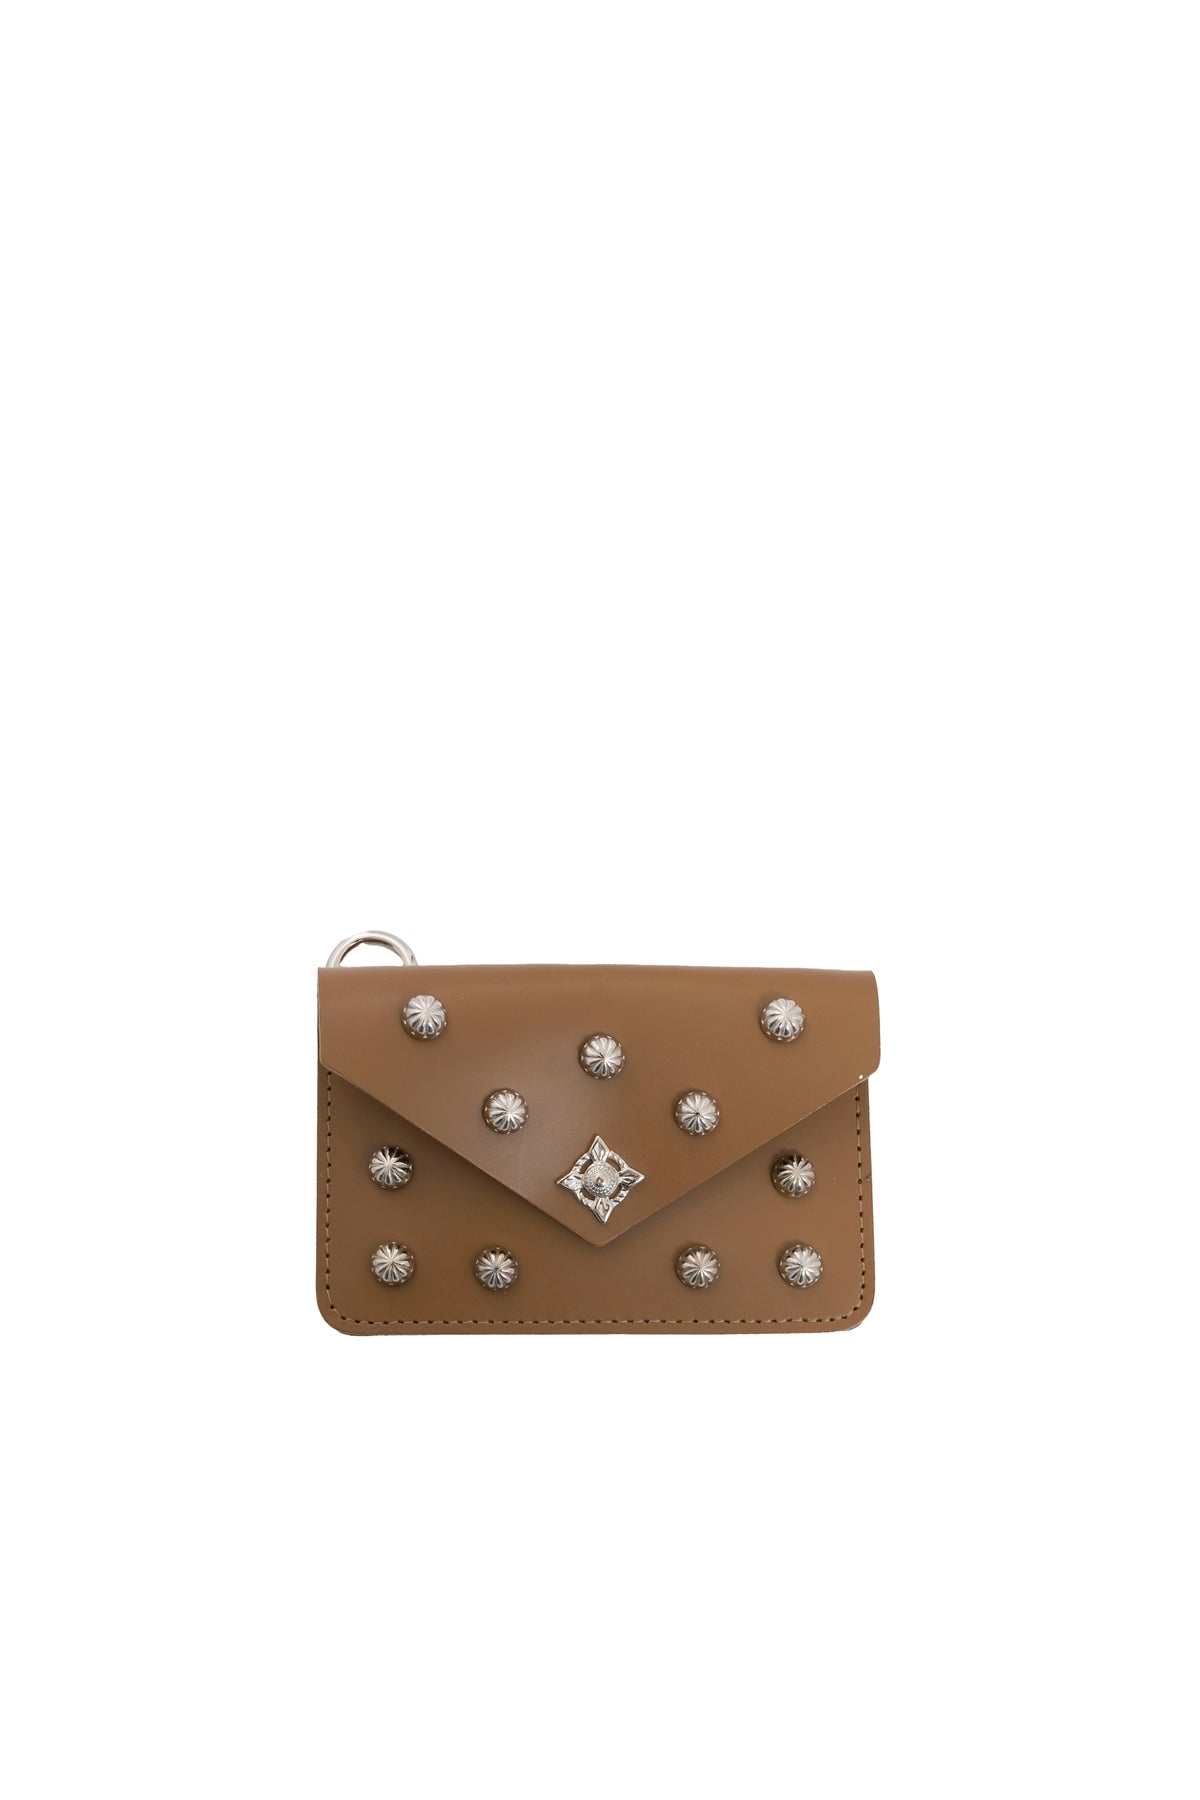 LEATHER POUCH SQUARE / CAMEL